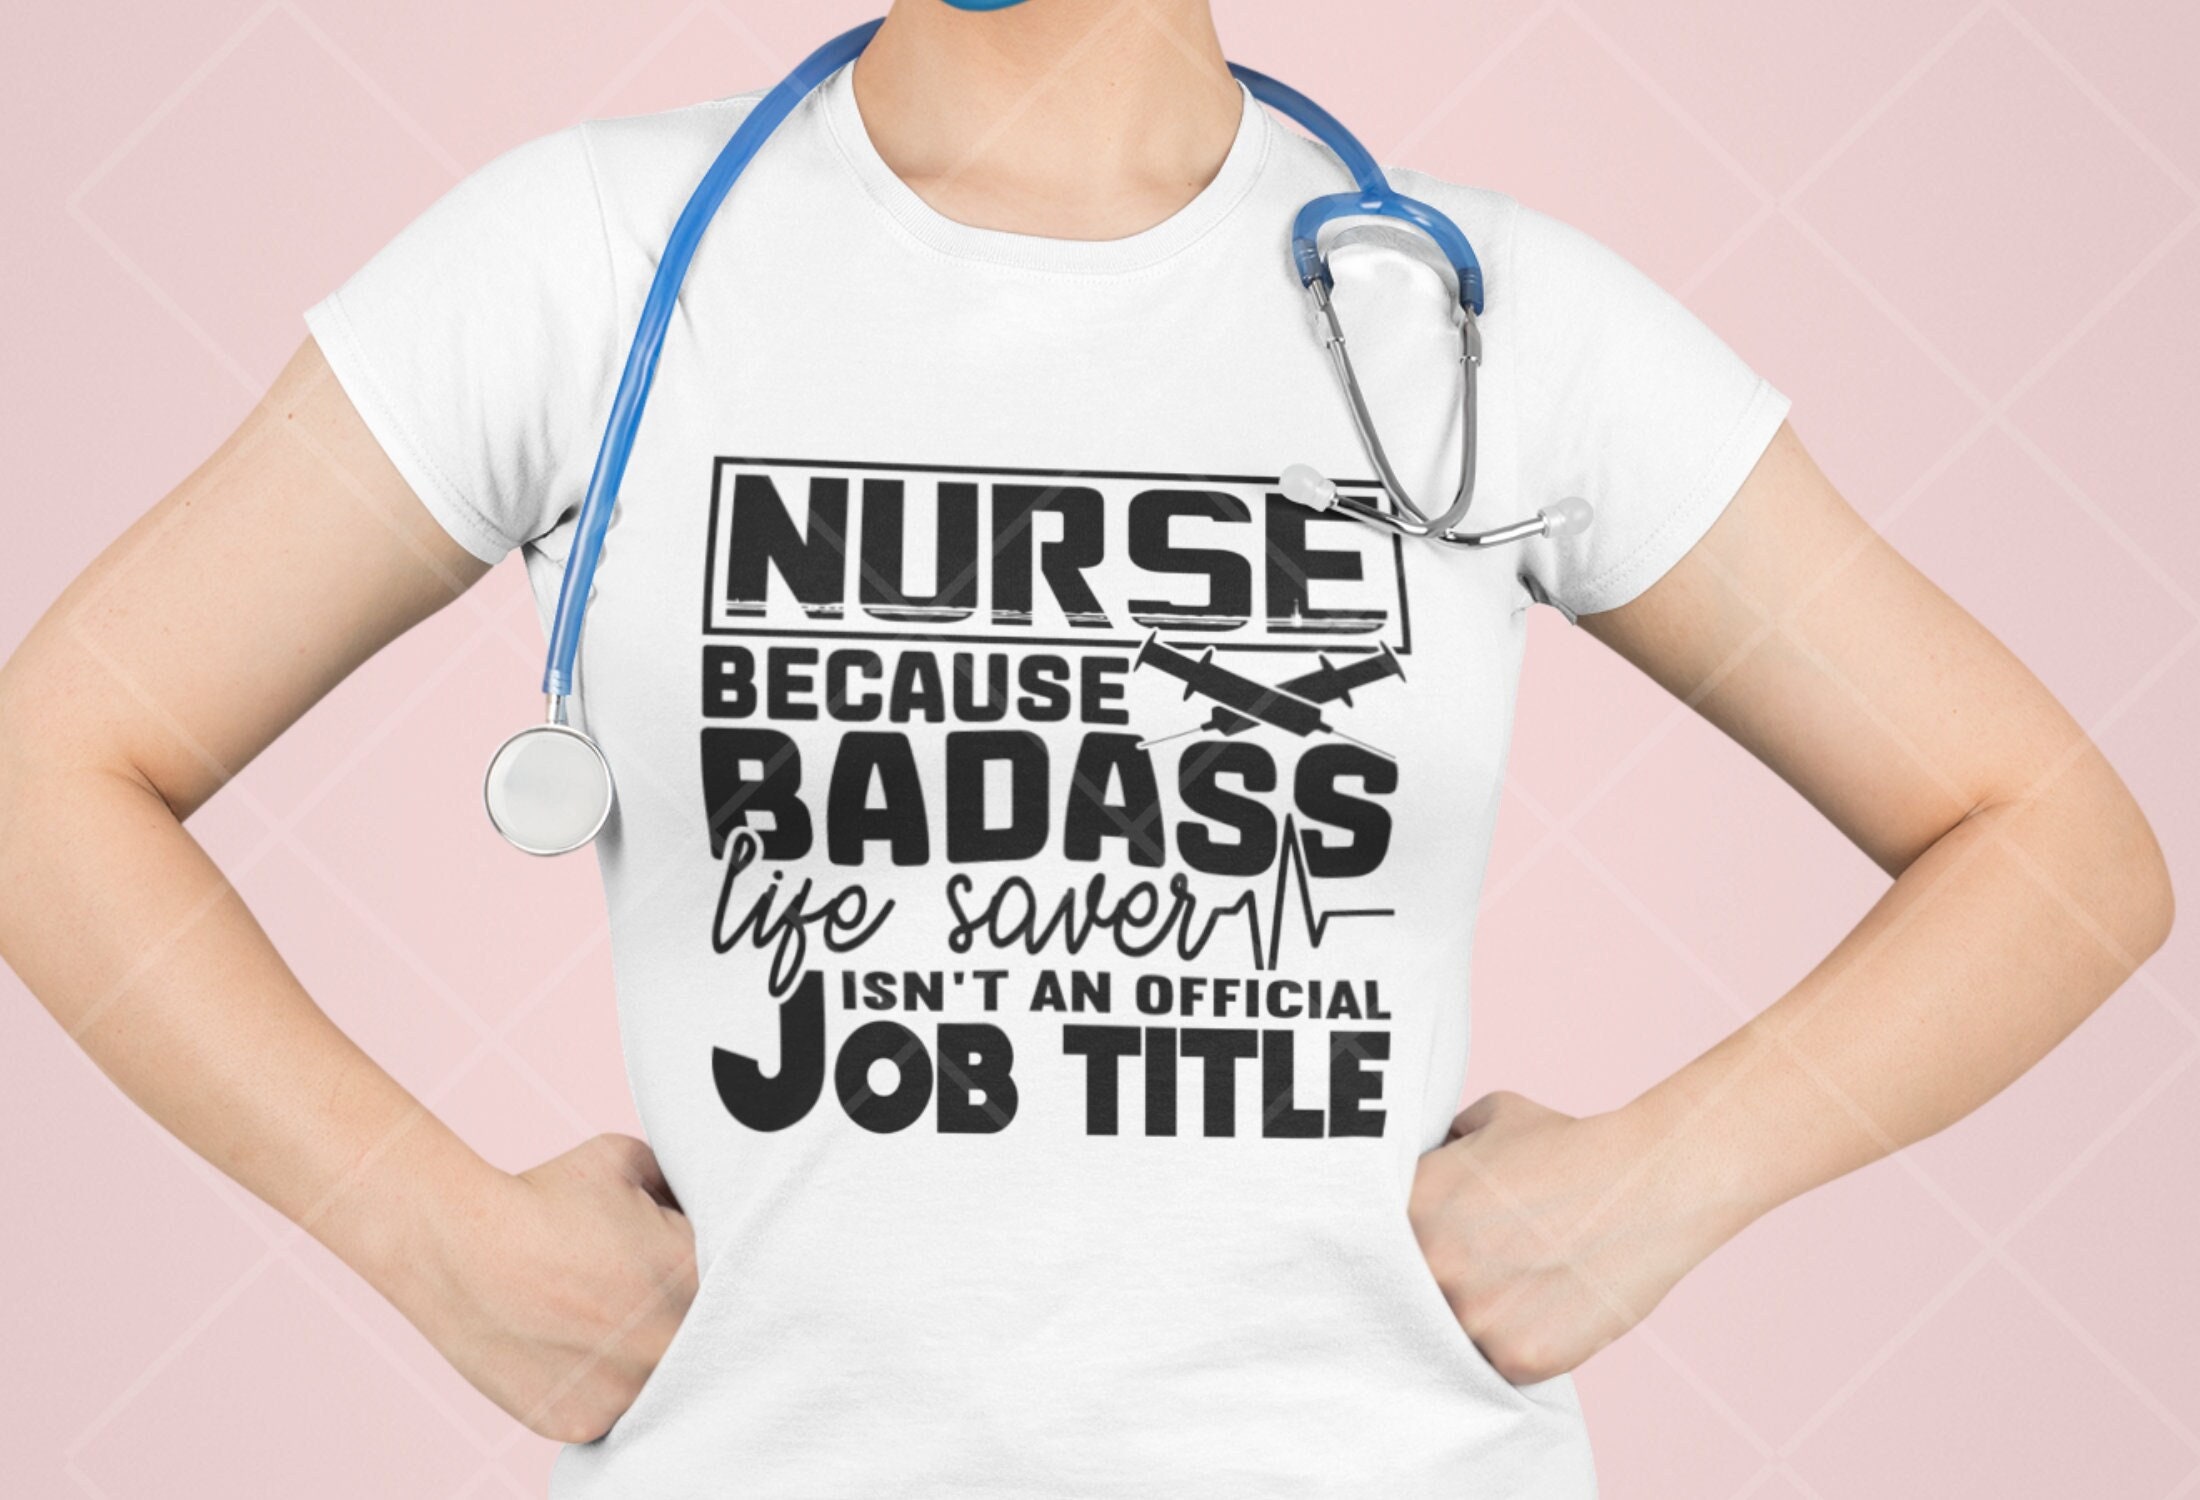 Nurses about their pens, Nurse merch  FREE SHIPPING  on all items.🚛  Nurse Stores:  Use promo  code: PROUDNURSE for free shipping., By Nursing memes